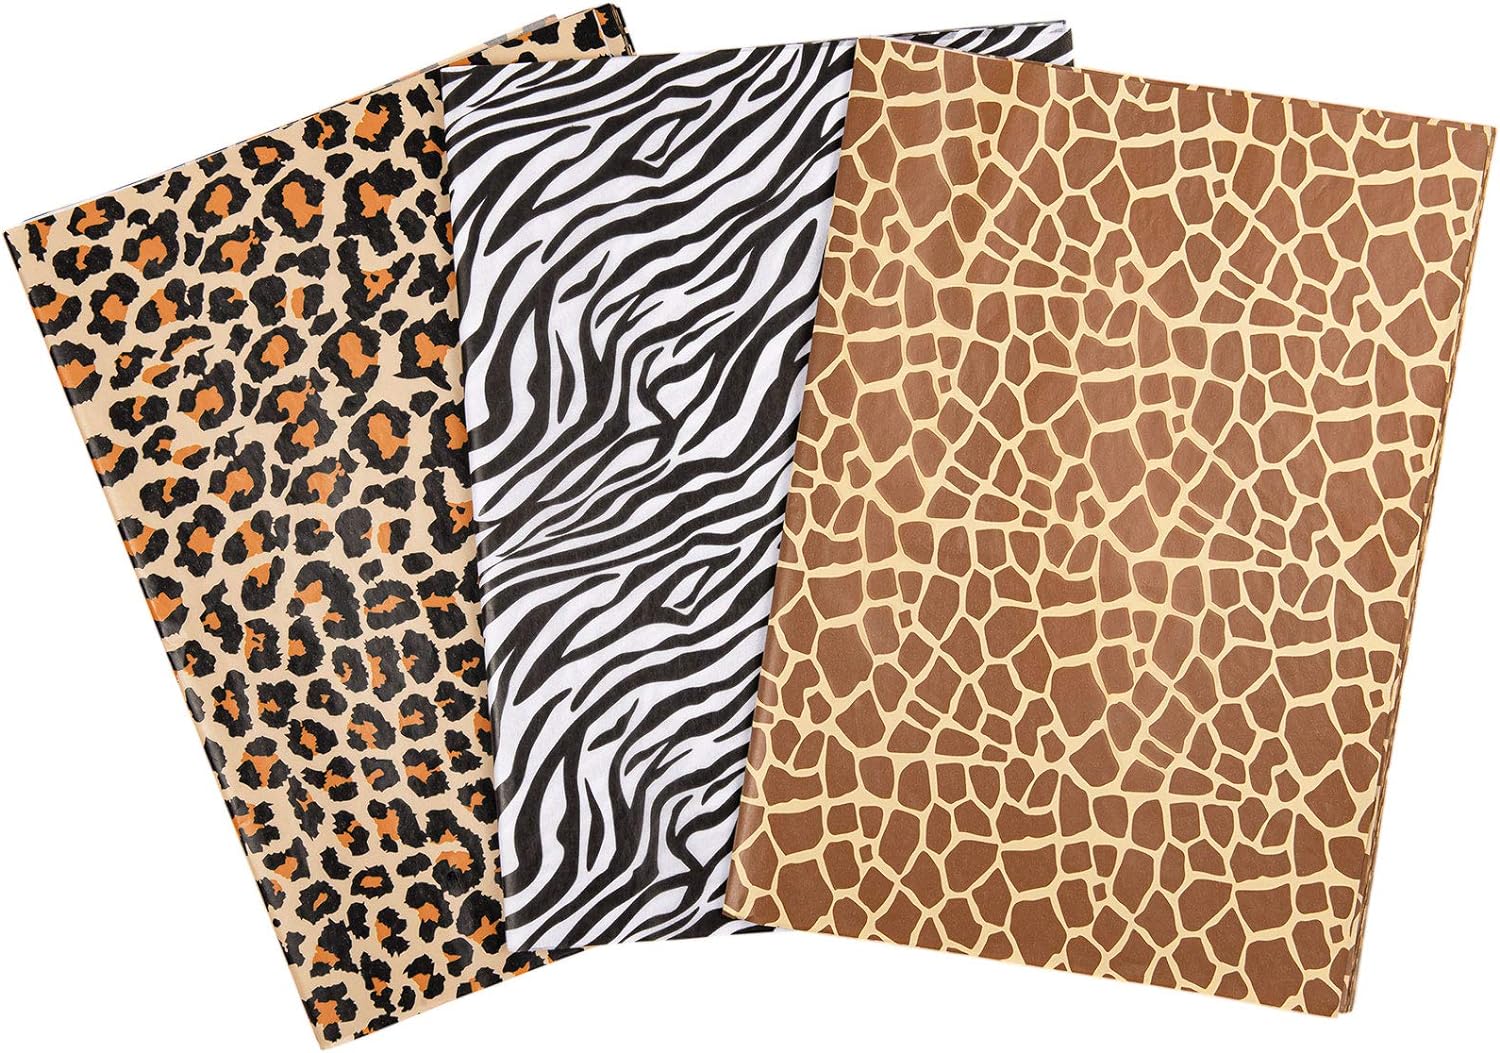 Whaline Animal Skin Print Tissue Paper 90 Sheet Leopard Zebra Giraffe Print Tissue Paper 3 Styles Patterned Wrapping Paper Gift Tissue Paper Assortment for Birthday Holiday Bags, 14 x 20